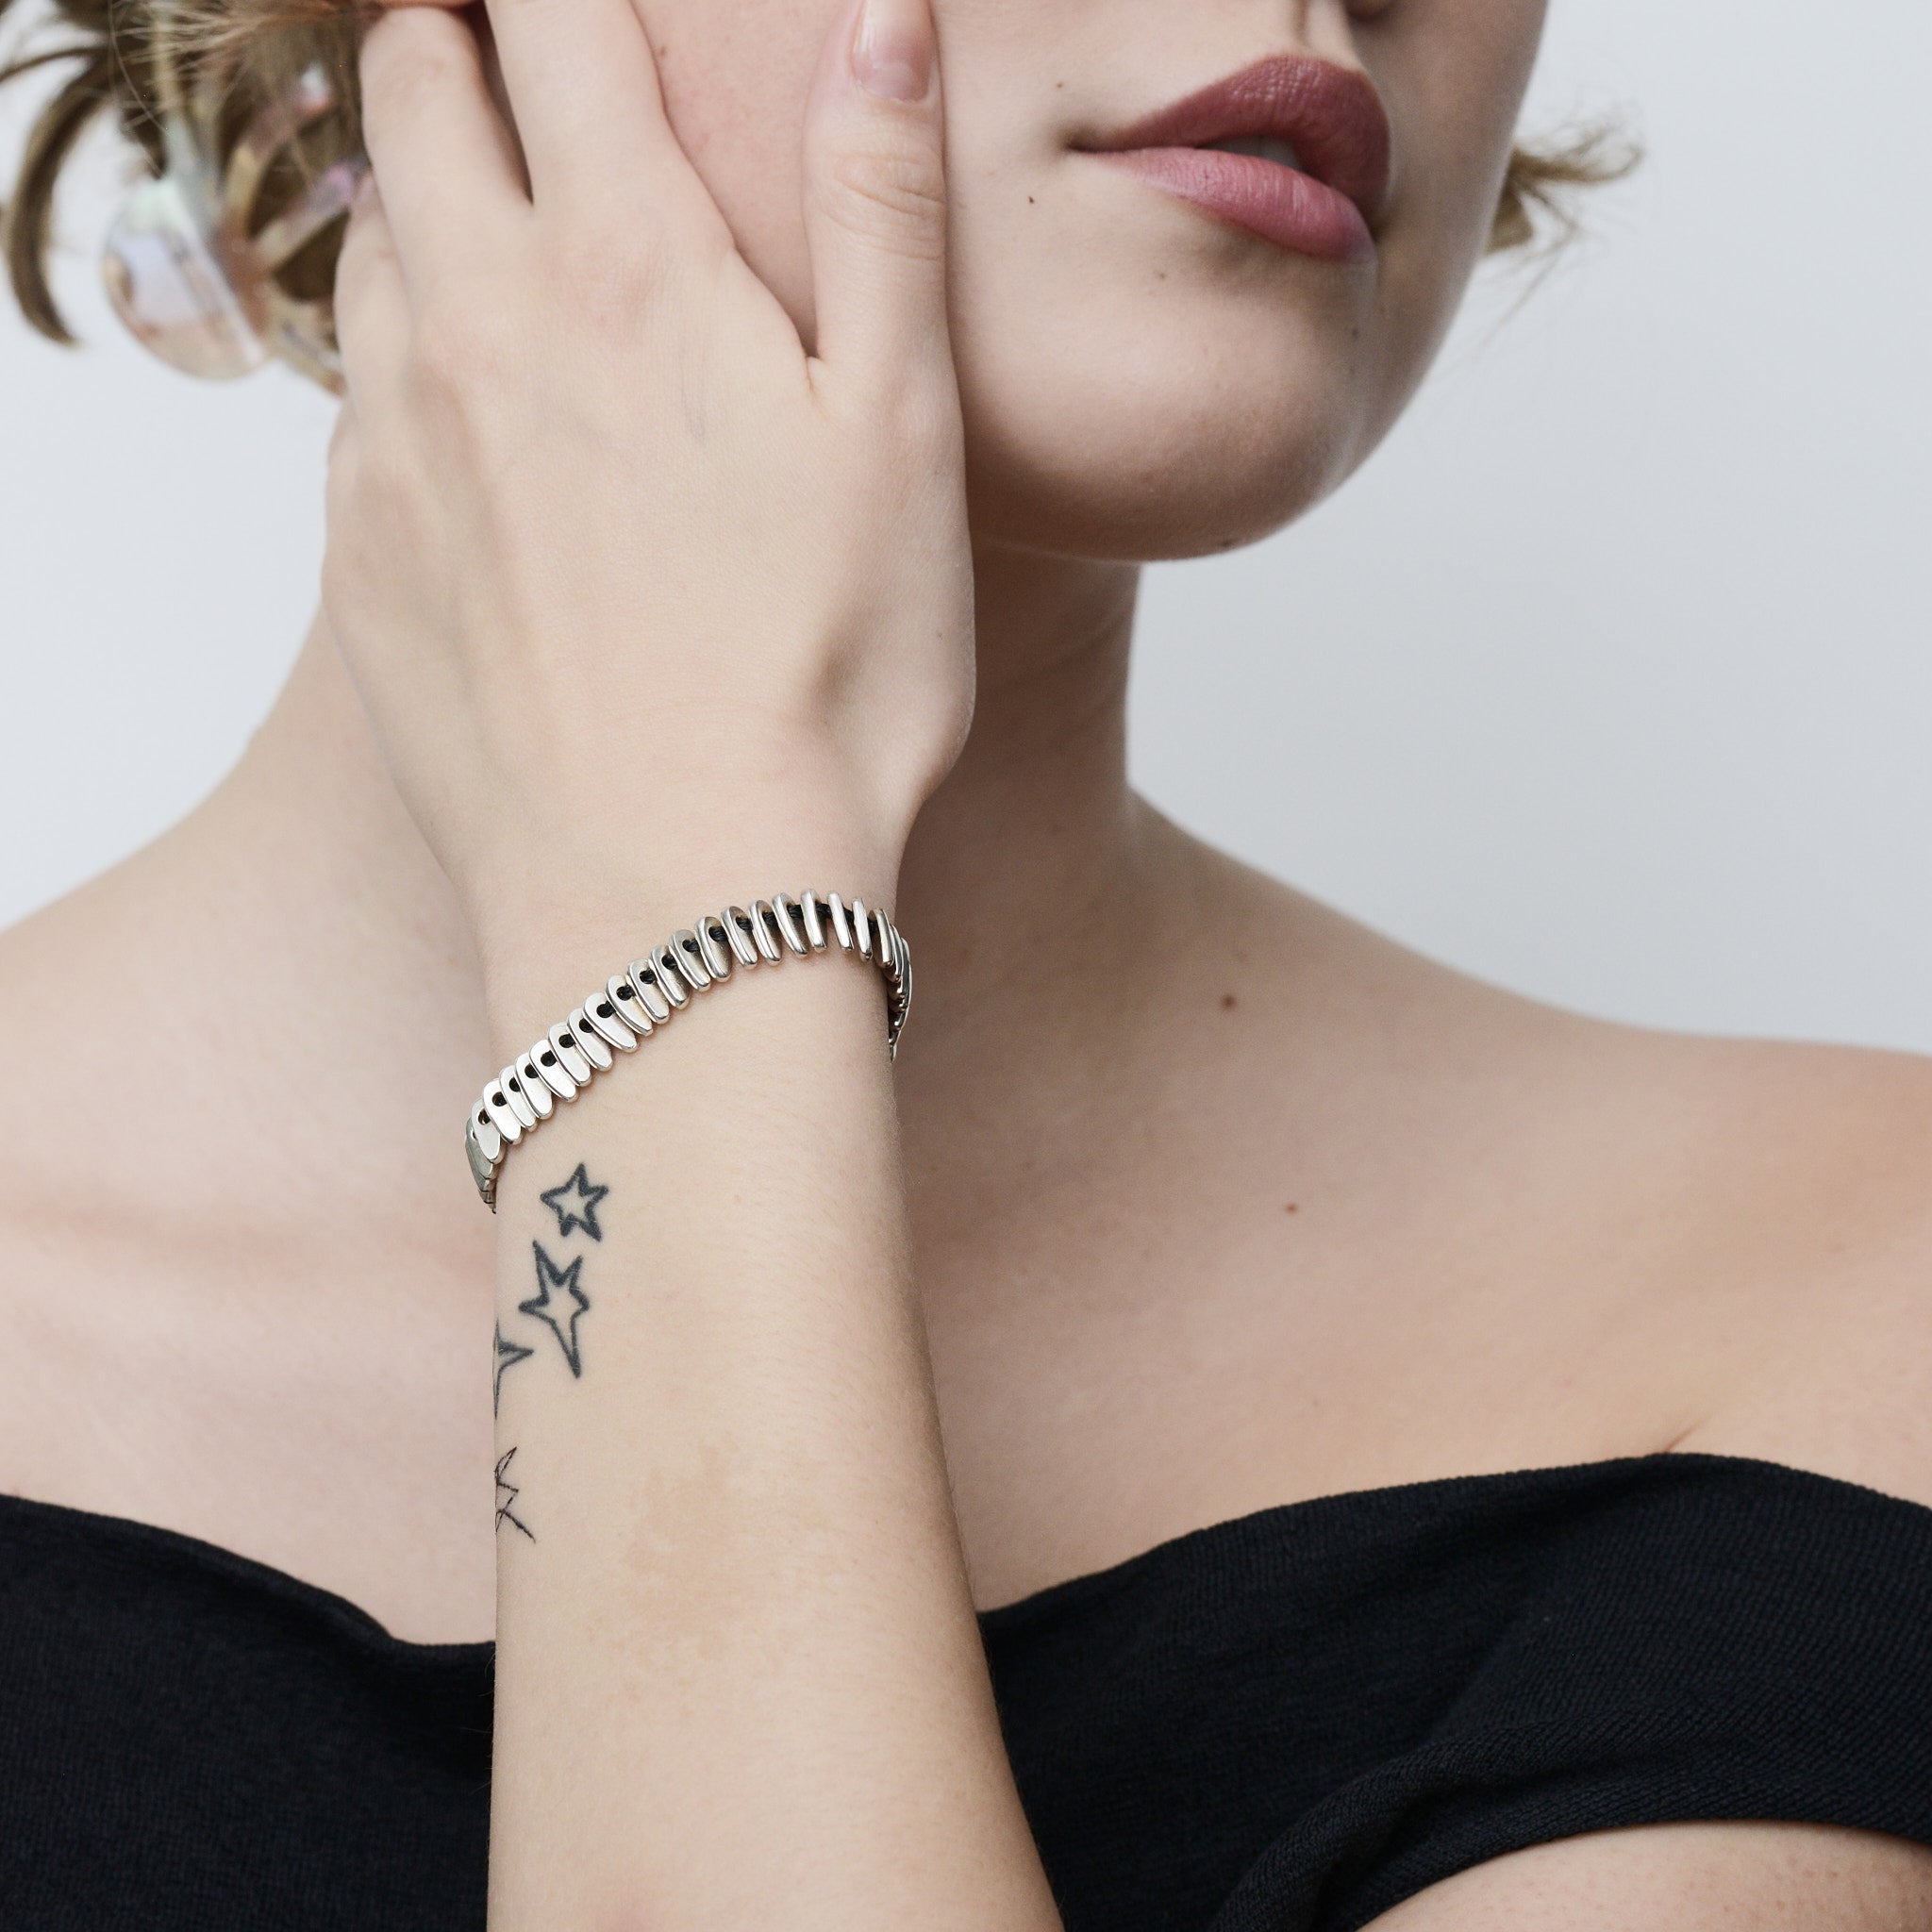 Tattoo bracelets are a thing and we want them all